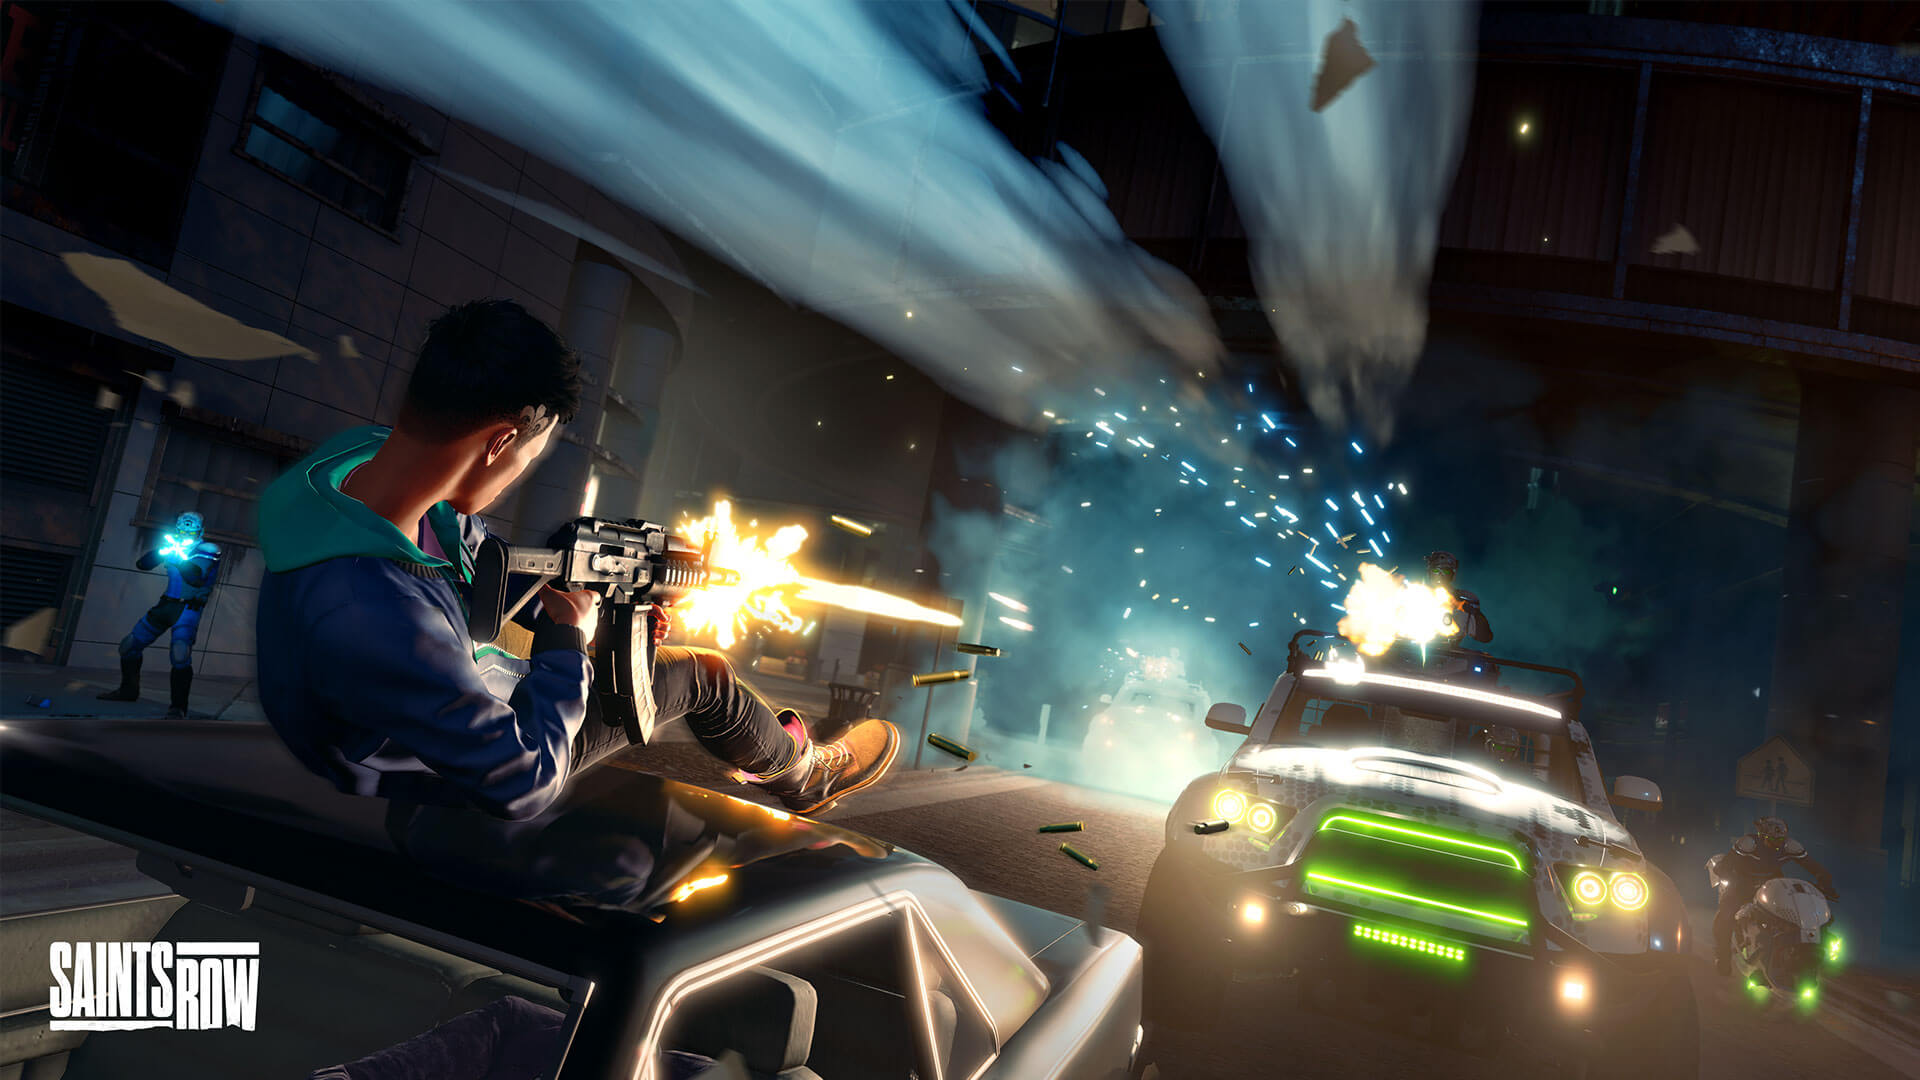 Saints Row' Review: Open-World Sandbox That's All About The Grind